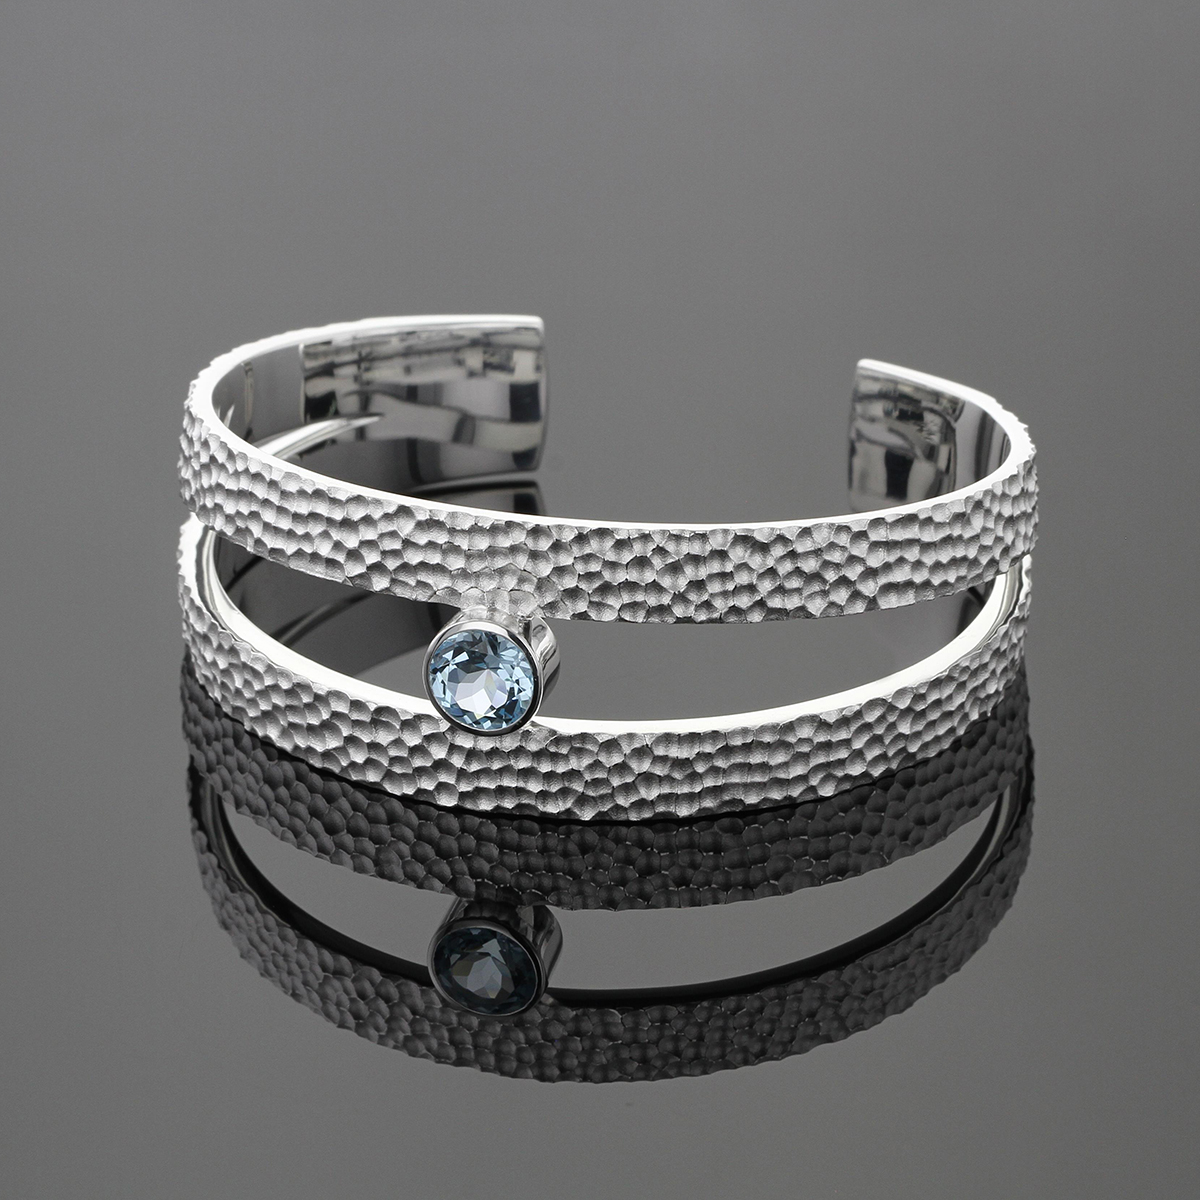 Statement bangle in sterling silver with our unique lava rock texture and a sparkling Blue Topas gem.